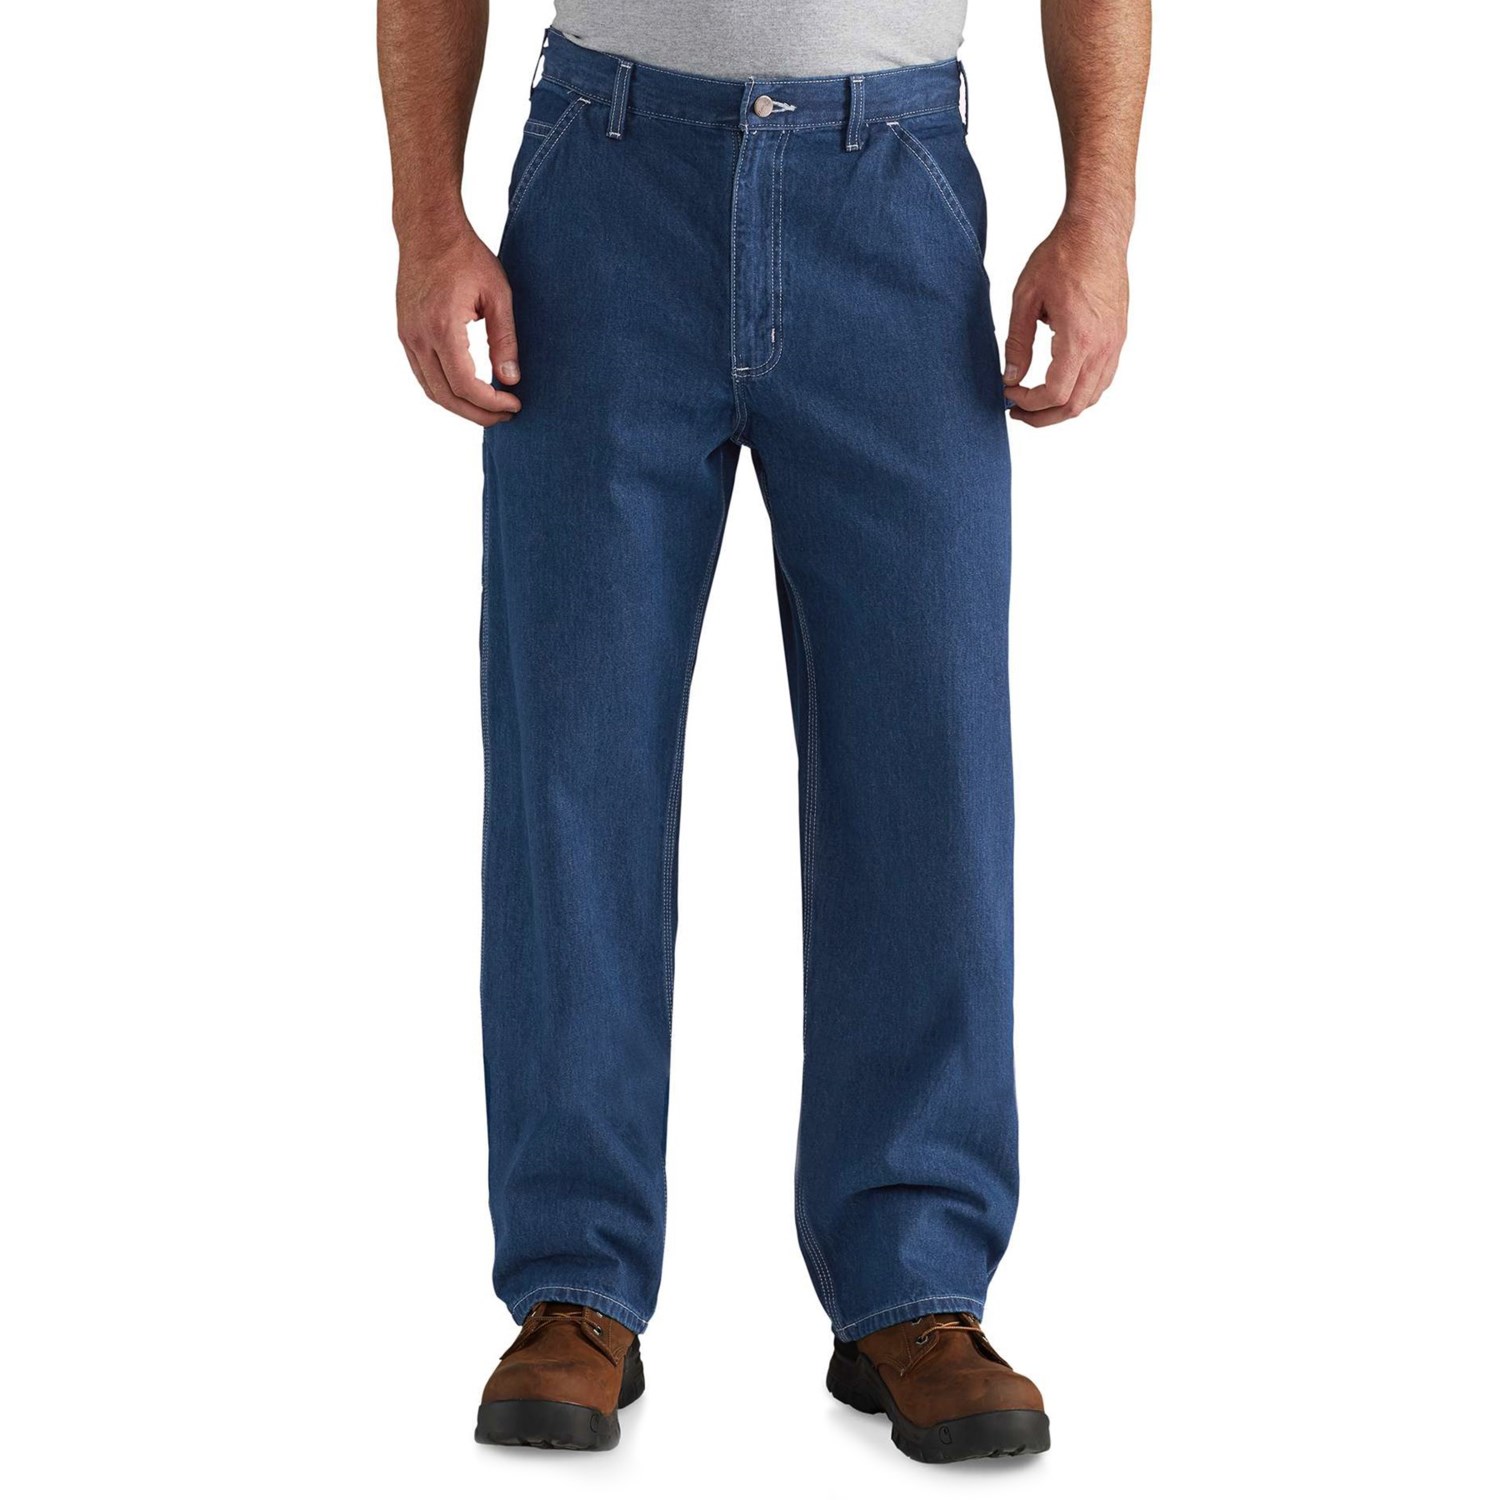 Carhartt Washed Work Dungaree Jeans (For Men)